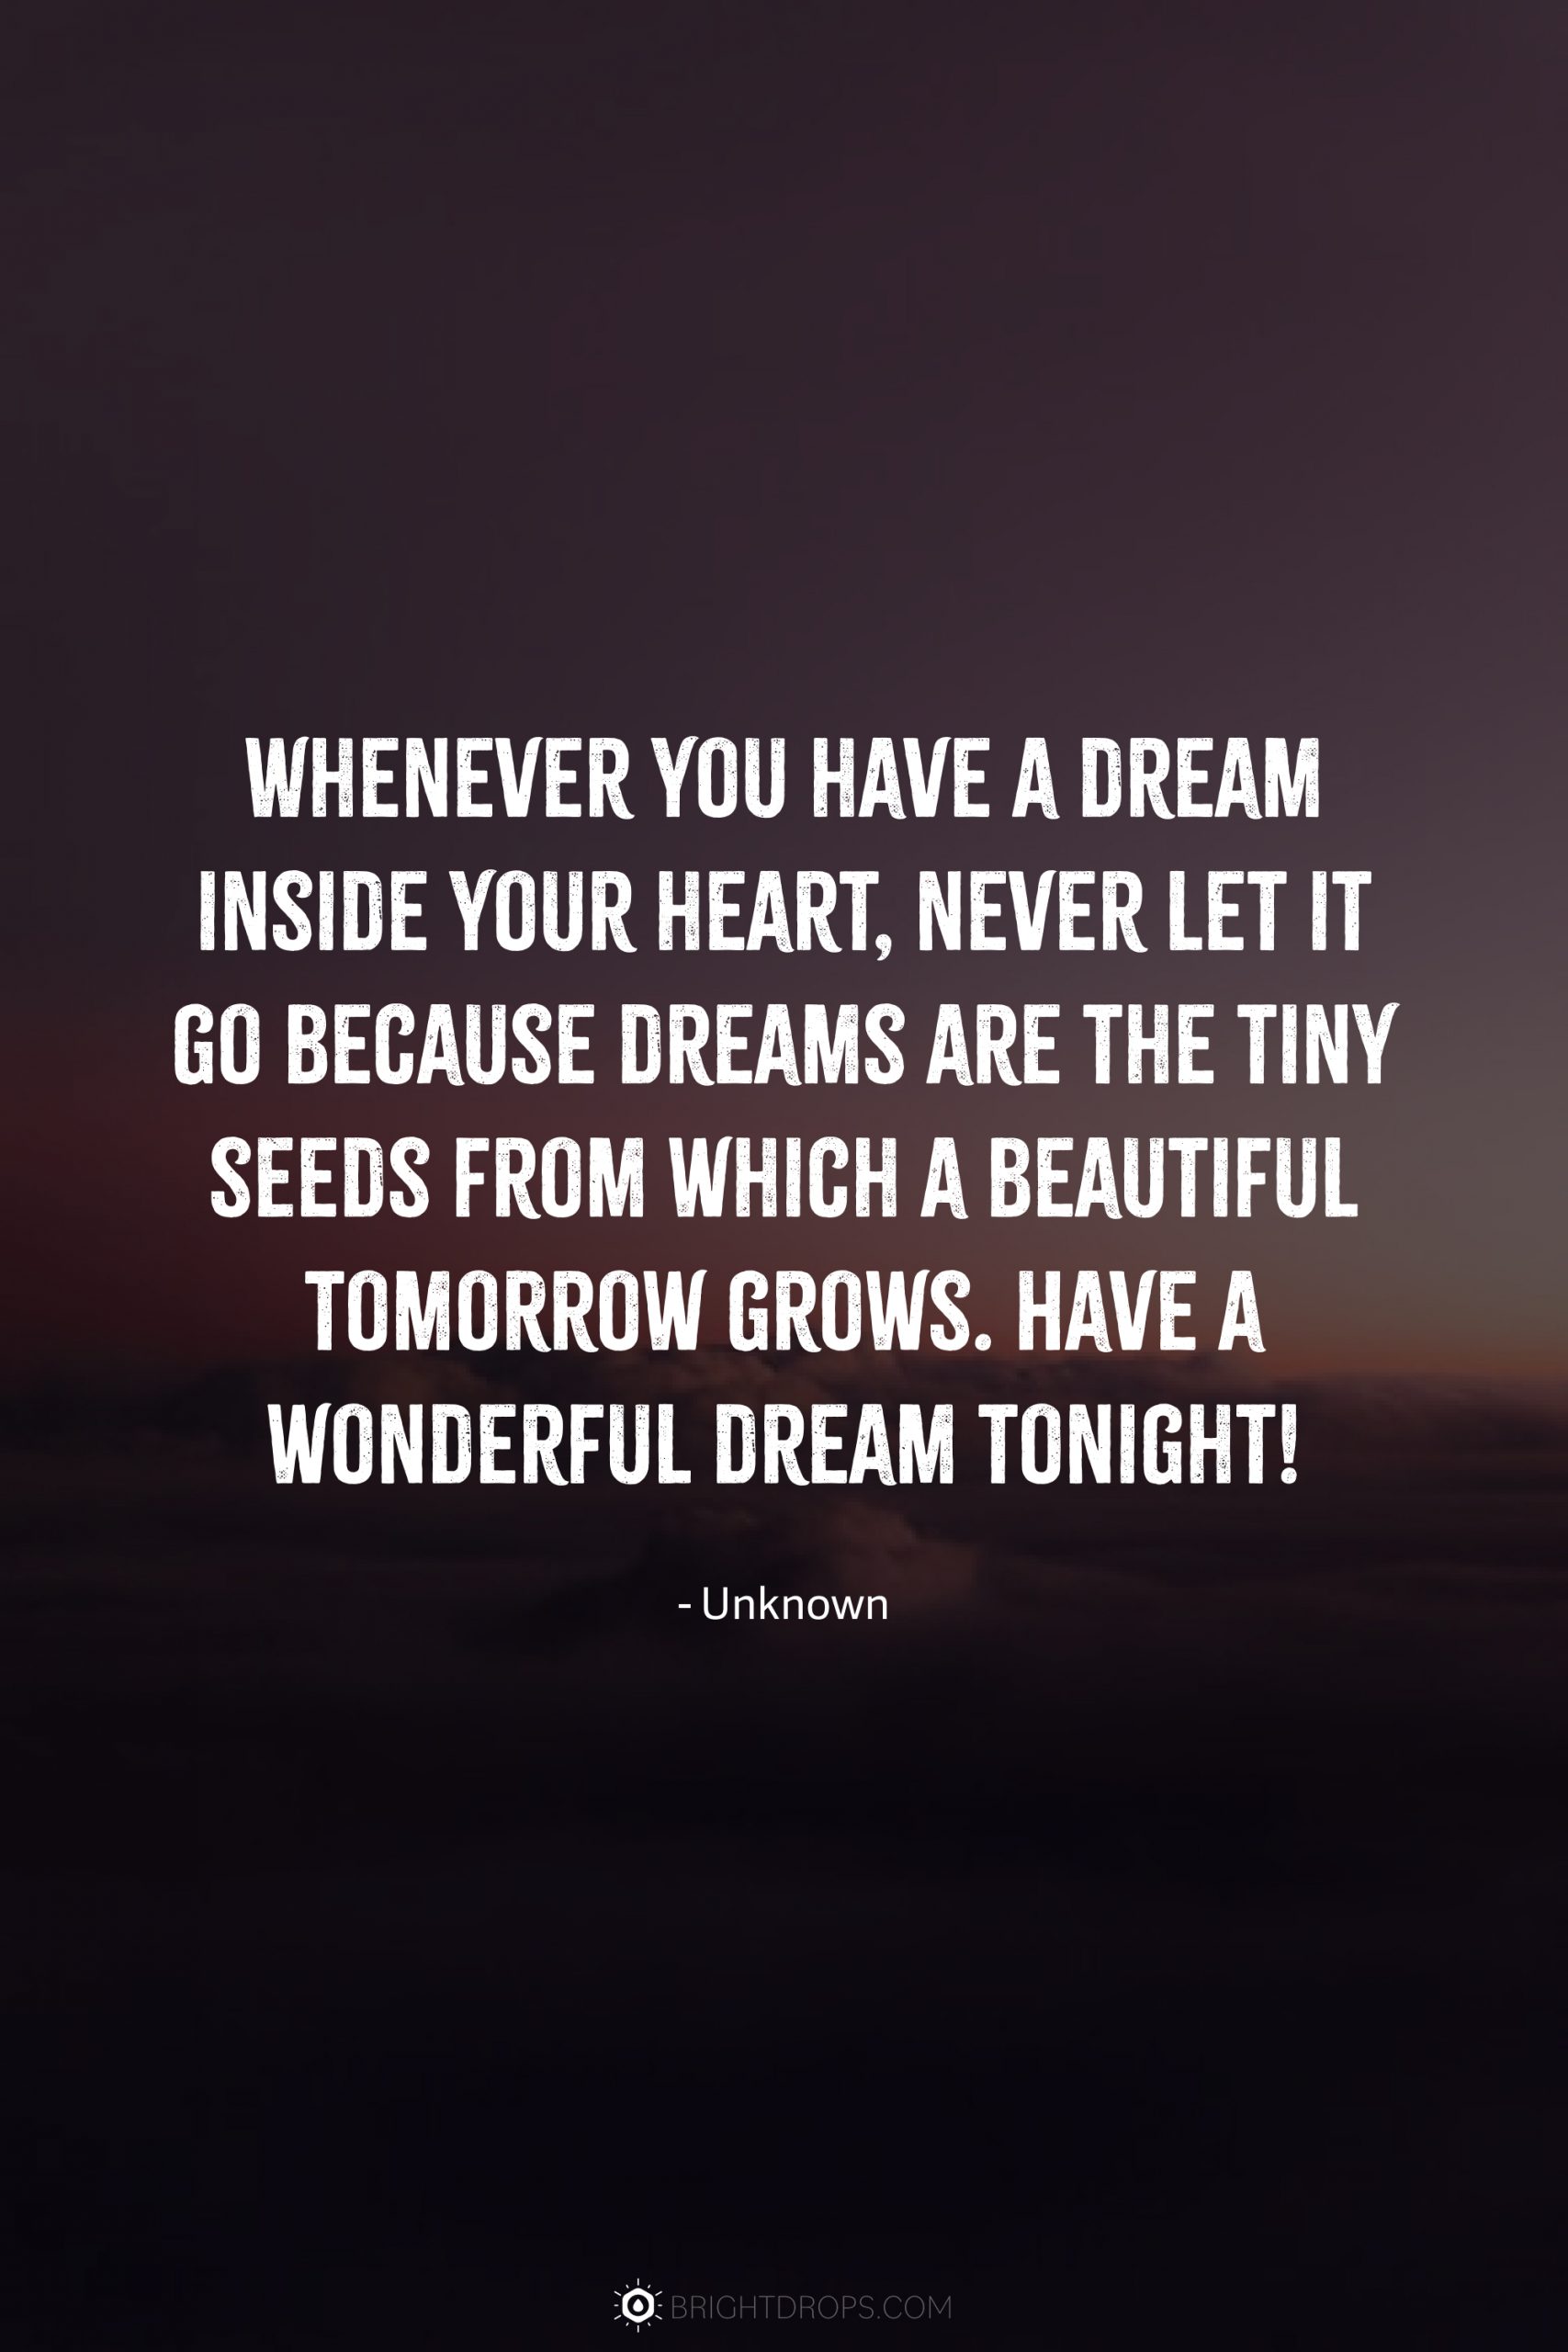 Whenever you have a dream inside your heart, never let it go because dreams are the tiny seeds from which a beautiful tomorrow grows. Have a wonderful dream tonight!